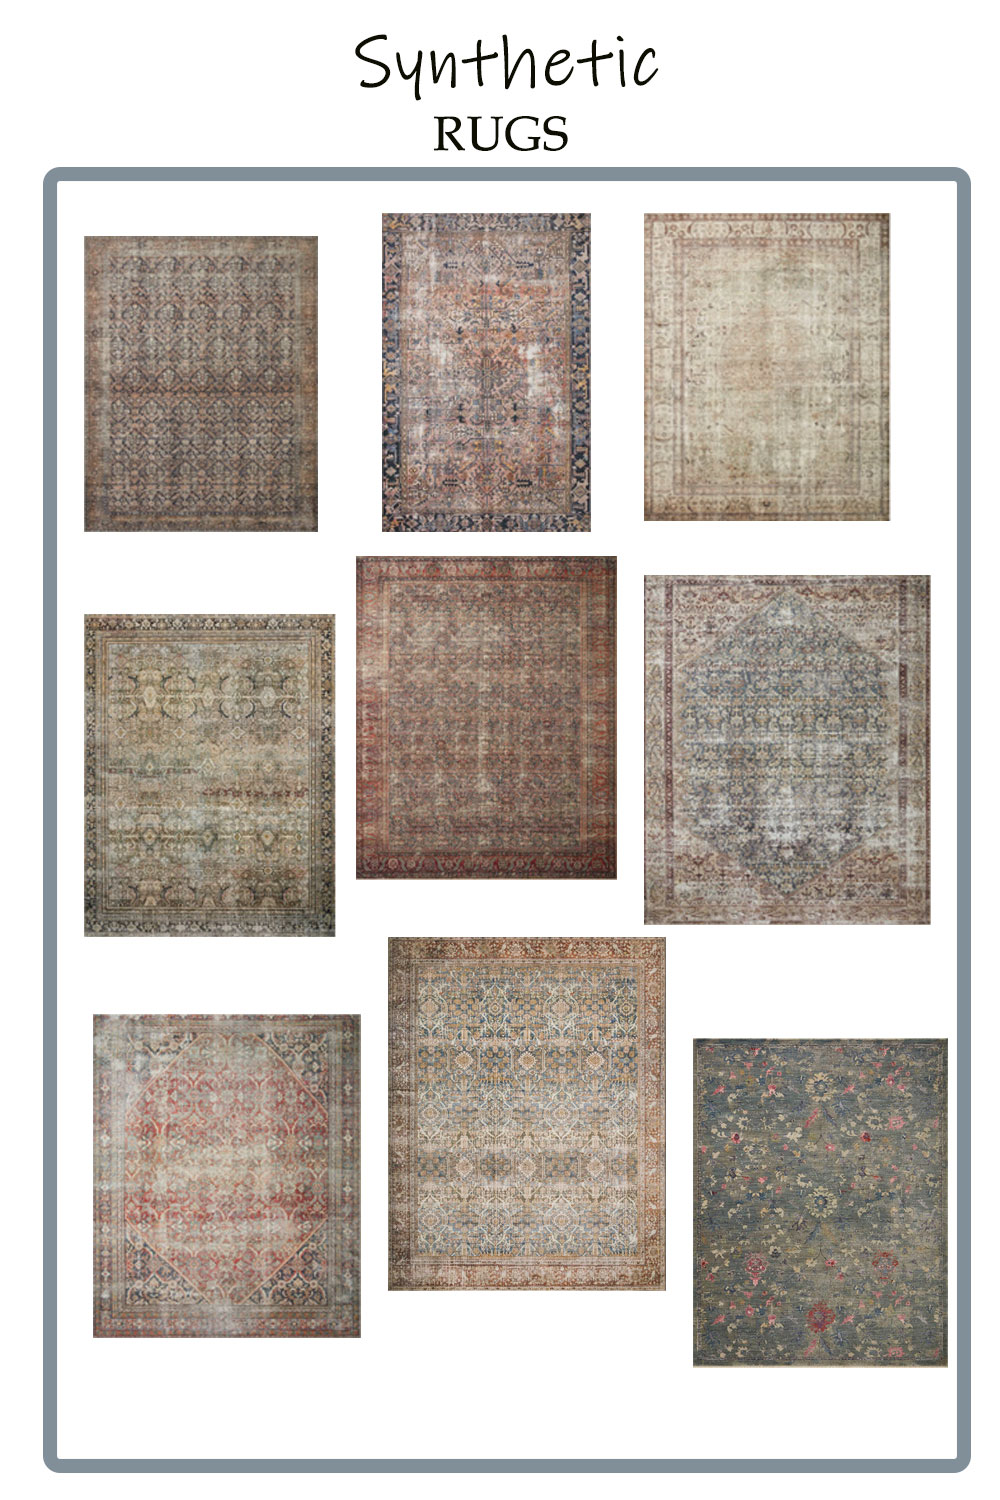 round up image with 9 different synthetic rugs  which is a good option to save on a rug when considering when to splurge or save